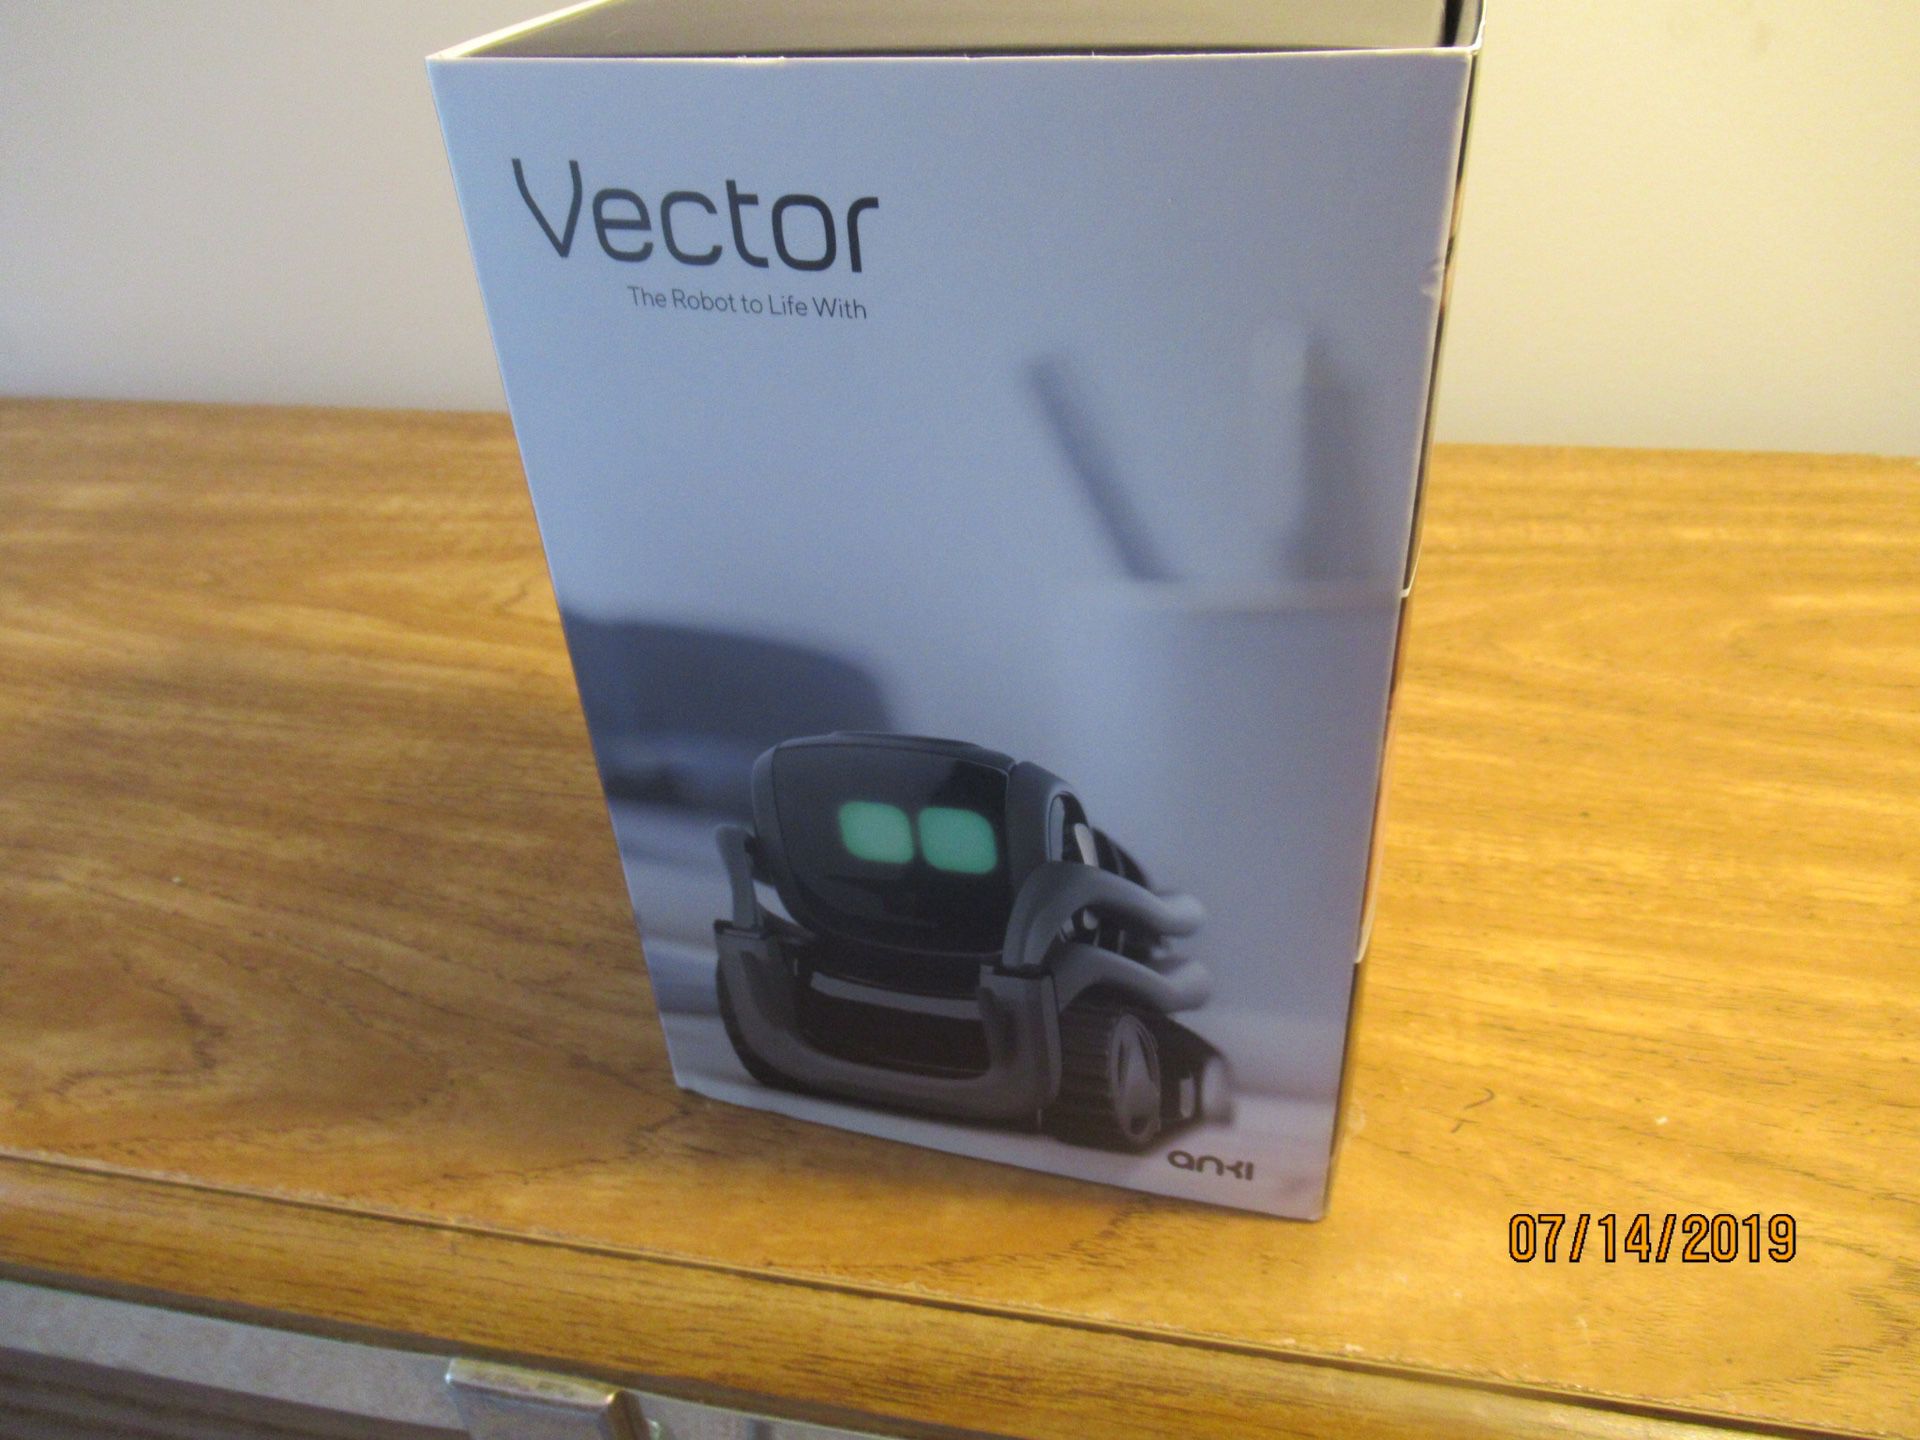 Anki Vector for sale barely used overall condition: good